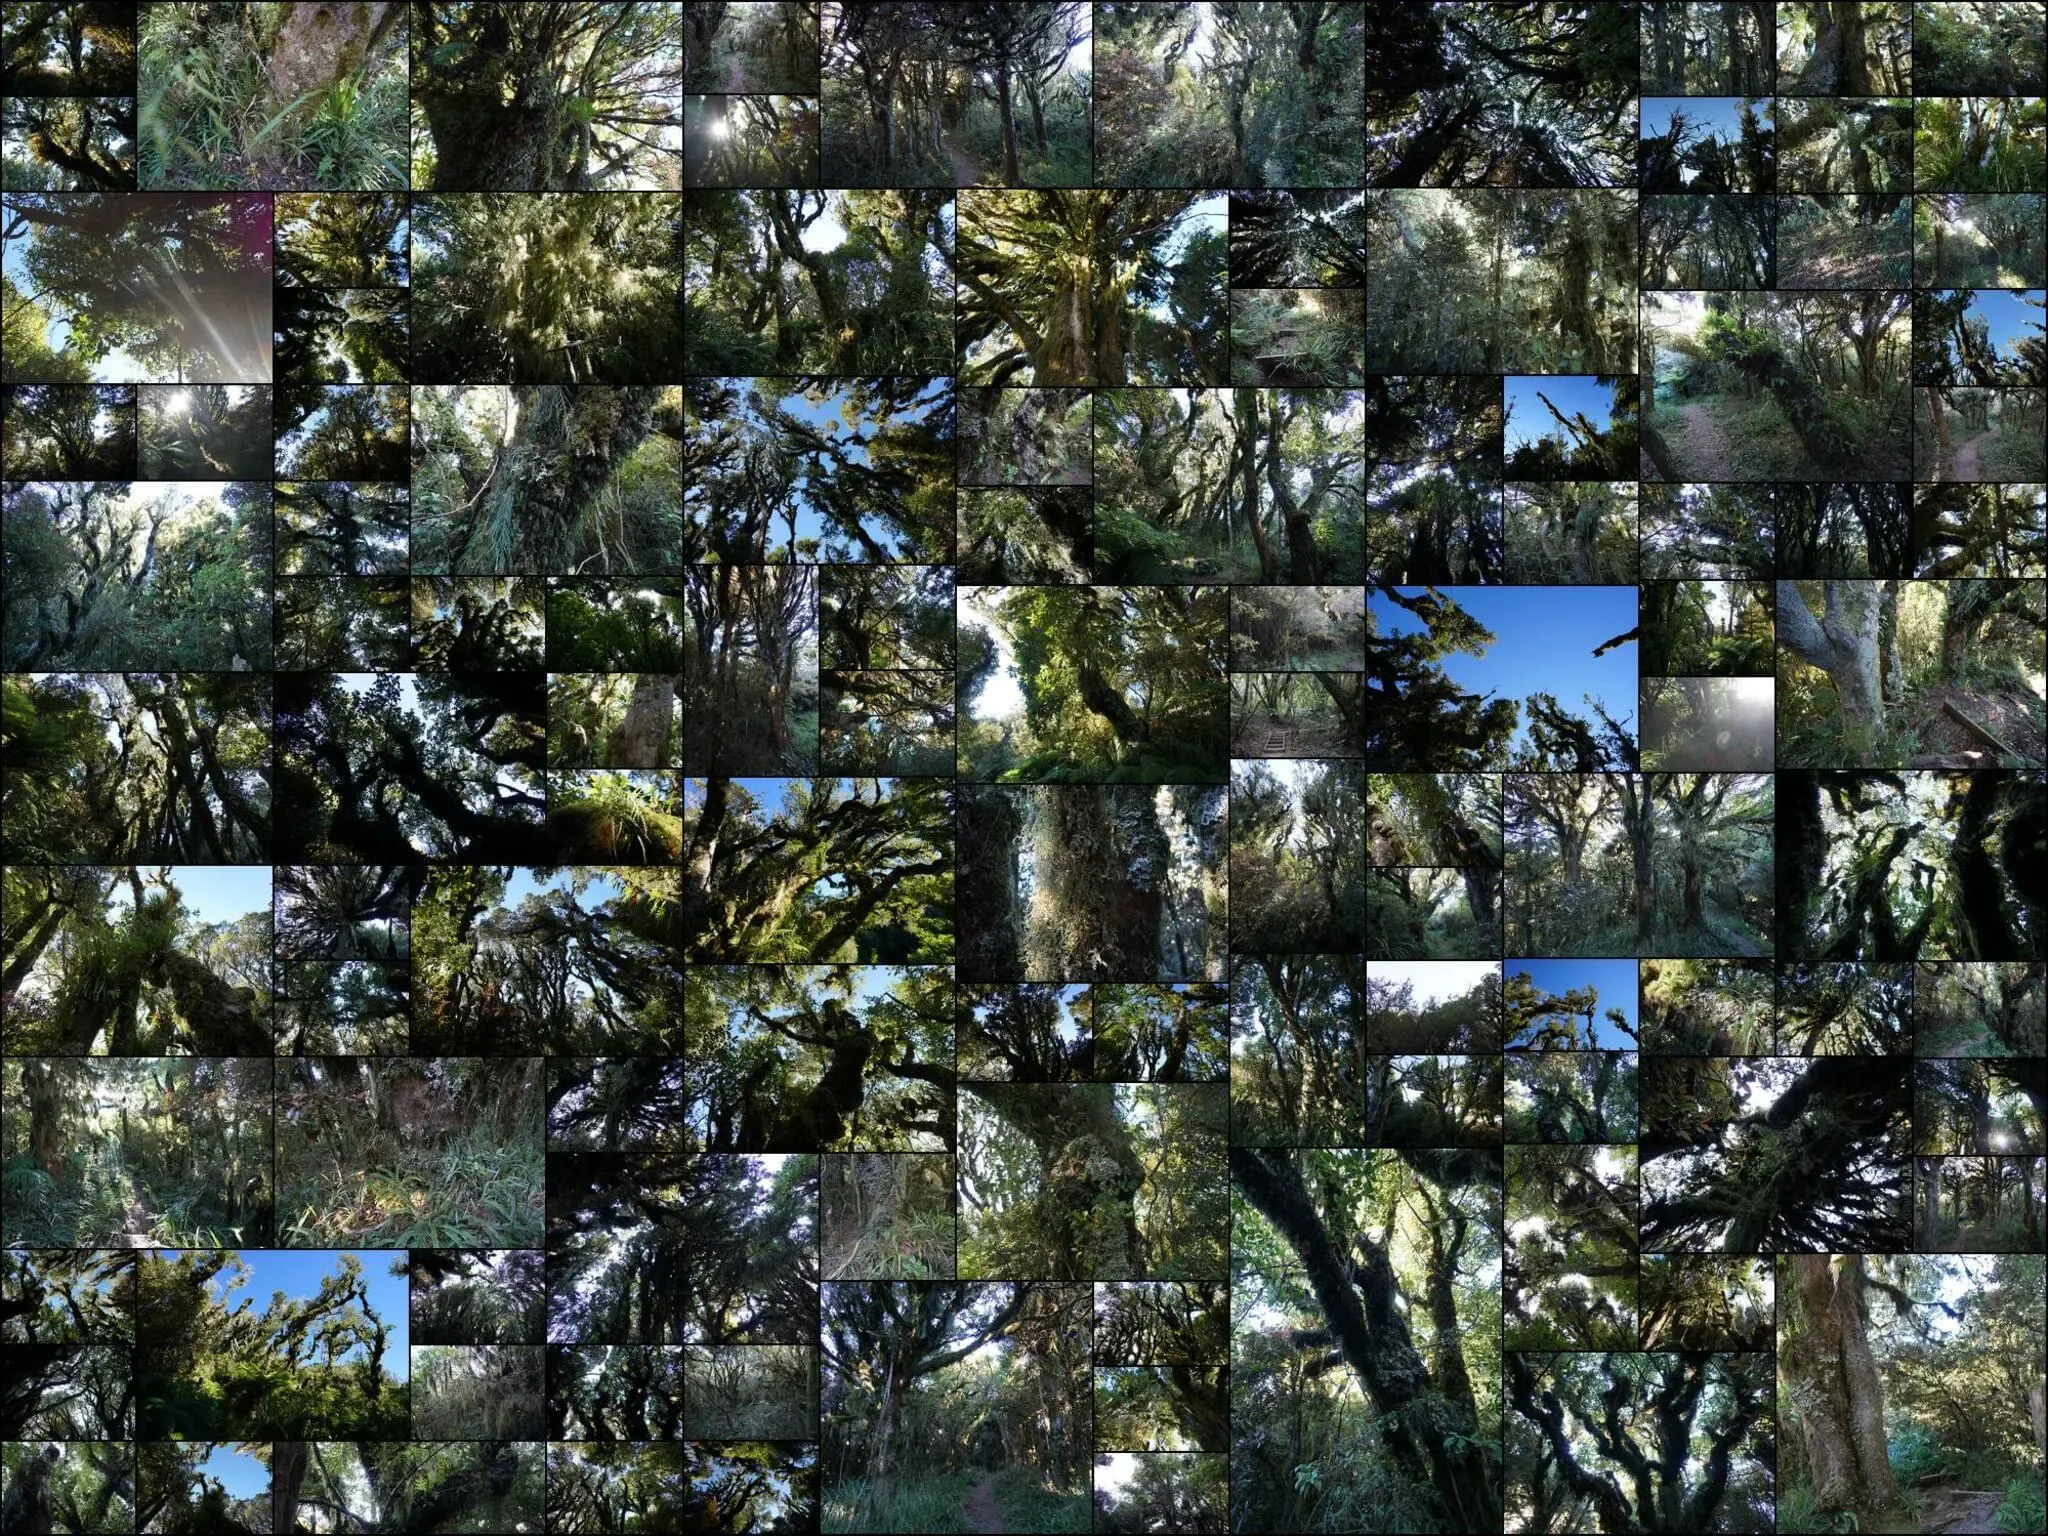 573 photos of Enchanted Forest